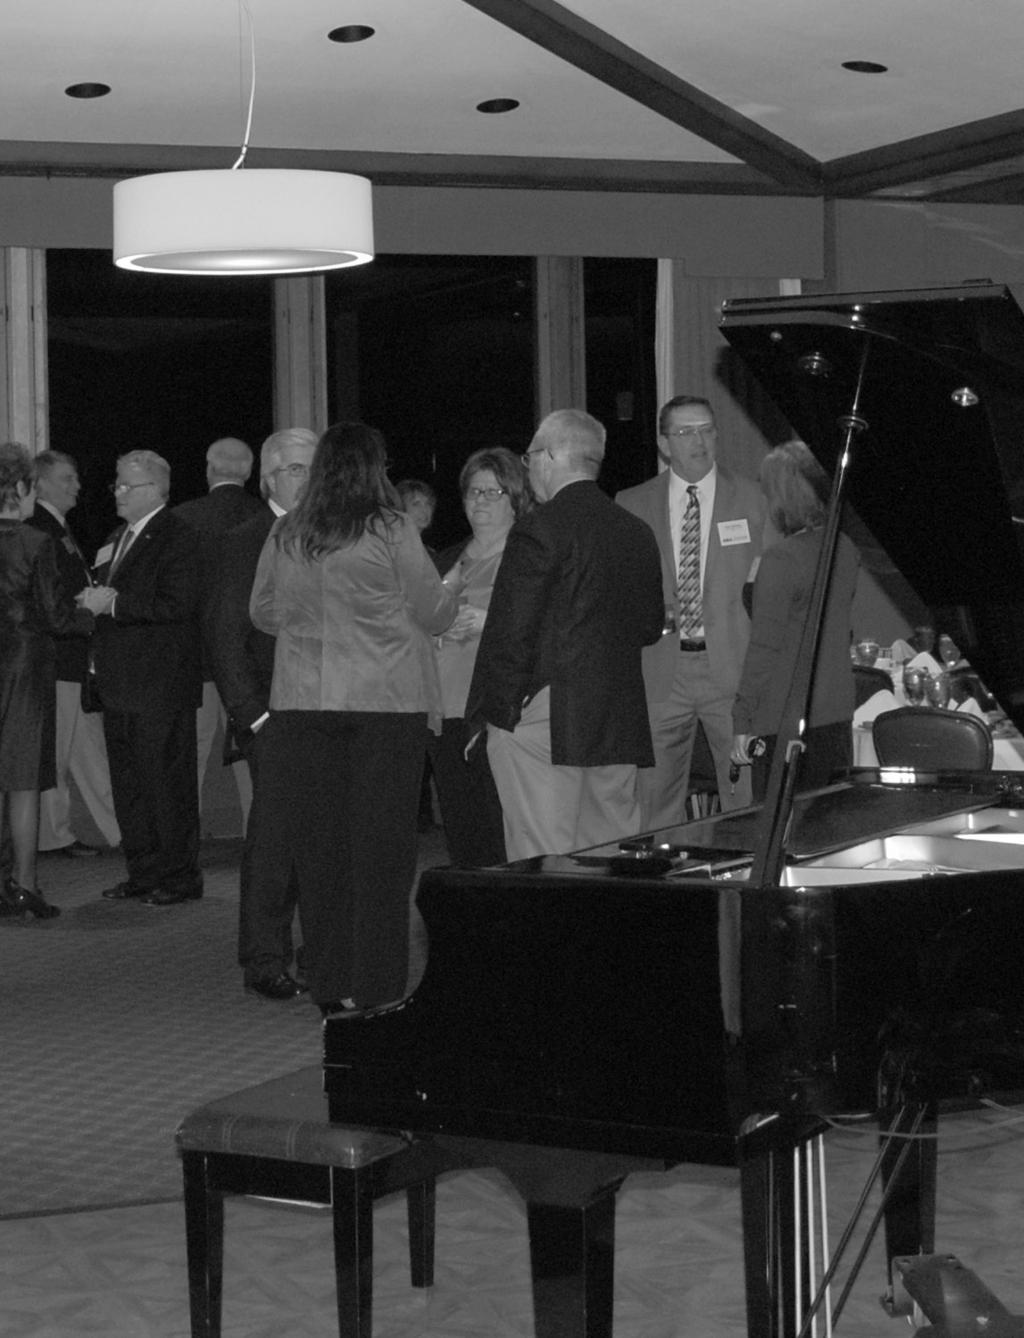 Later in the evening KMCA hosted reception and dinner for its members to talk with legislators about current issues in